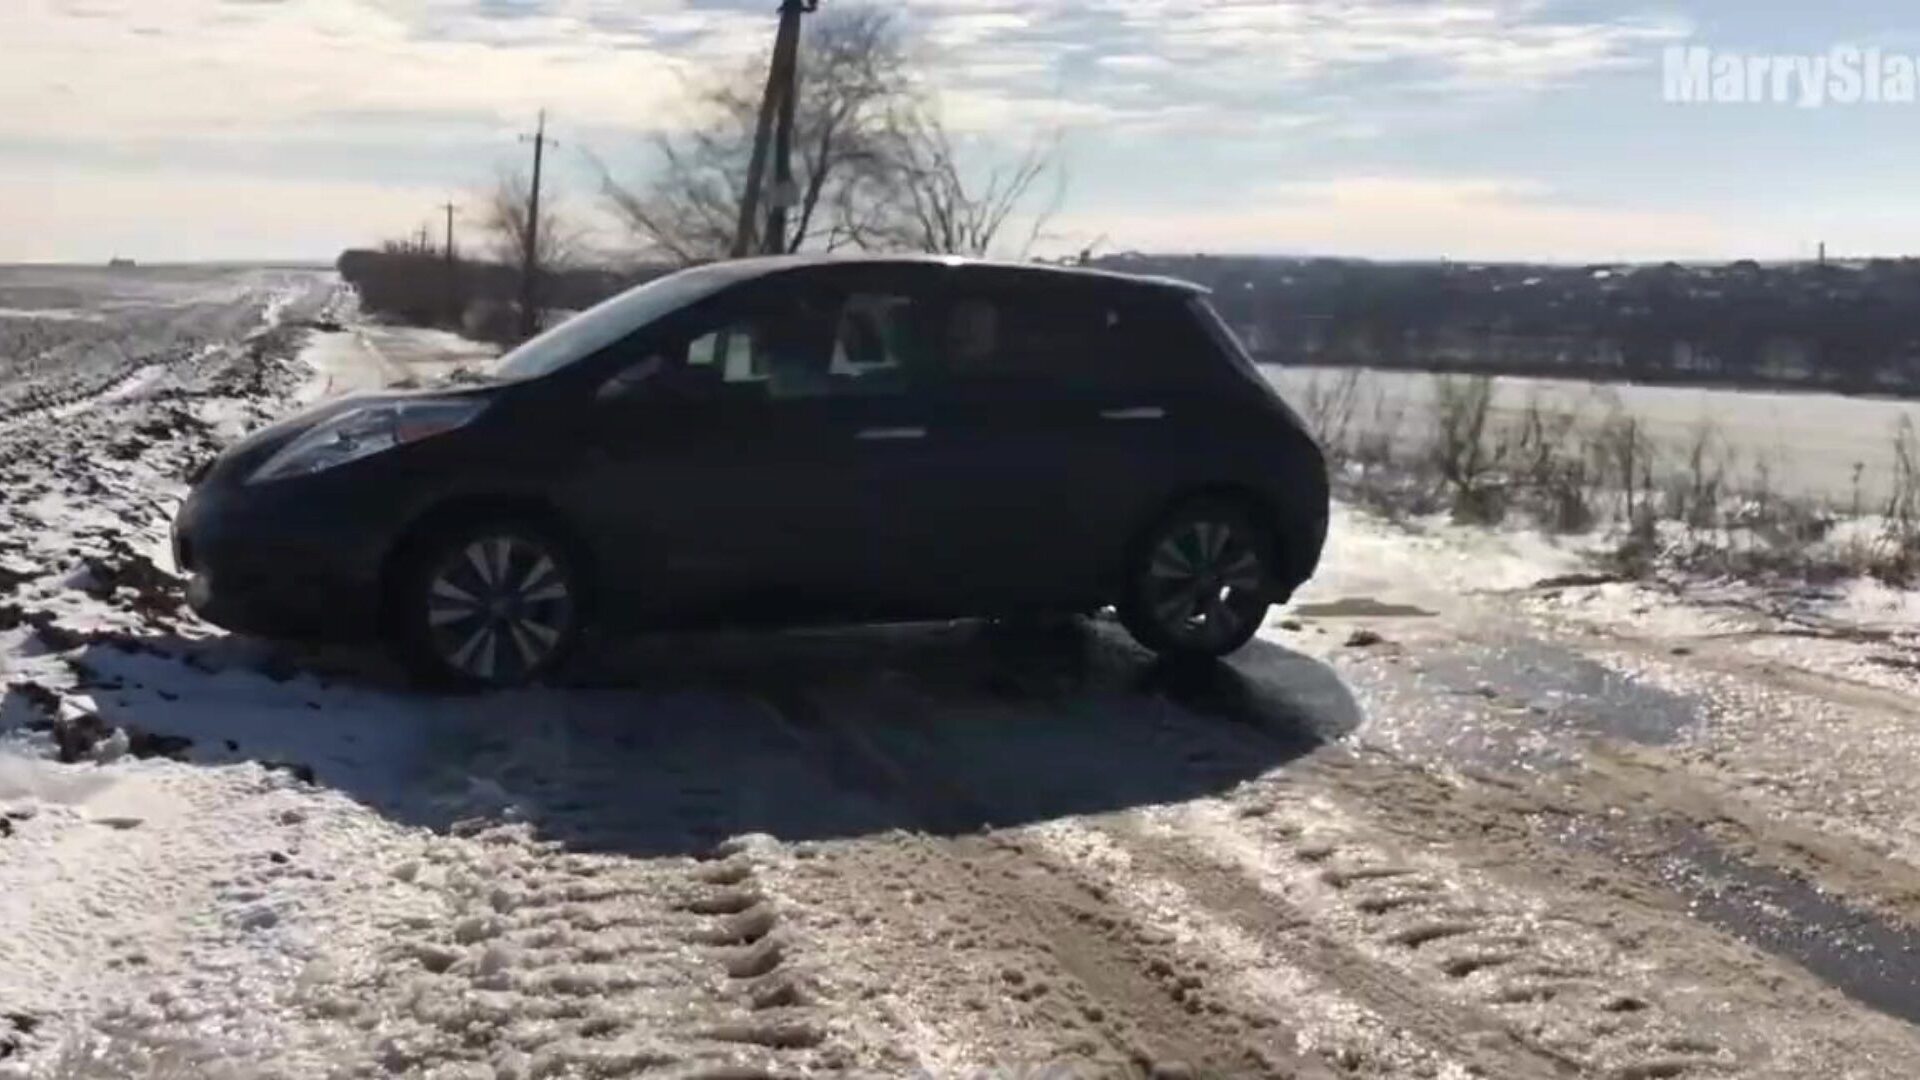 HOT PUBLIC SEX IN a CAR - in the Middle of the Winter Field